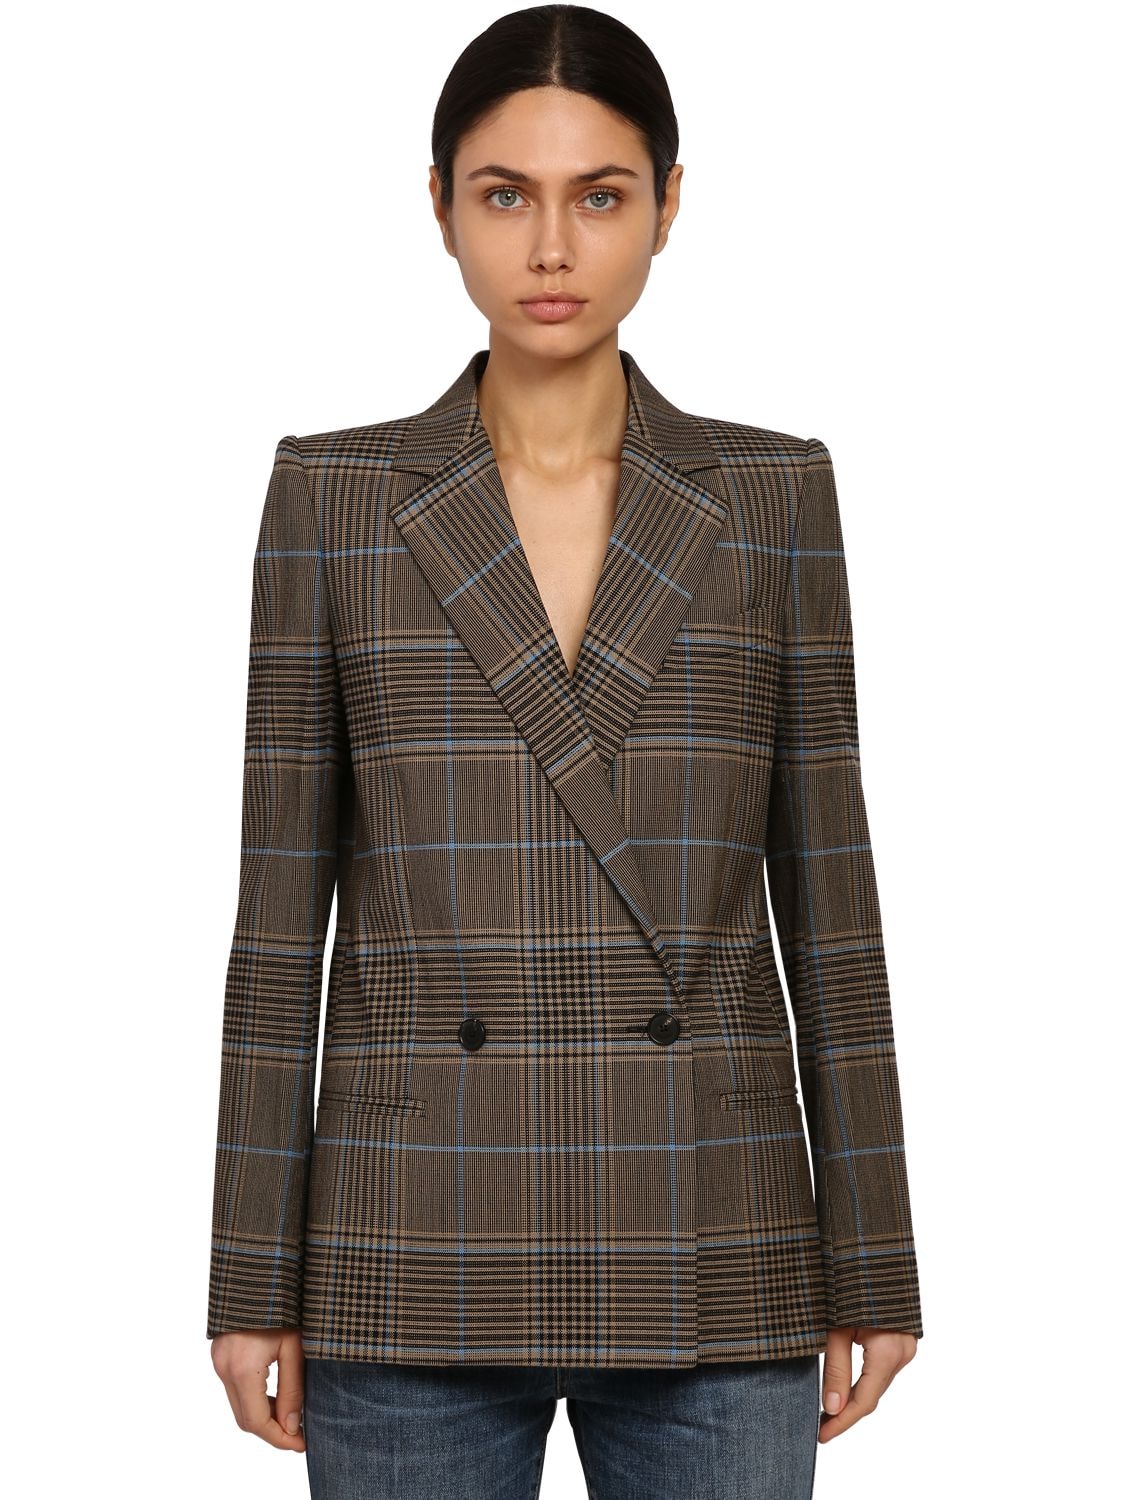 GIVENCHY DOUBLE BREASTED CHECK WOOL BLEND BLAZER,70IA7M006-NDYW0